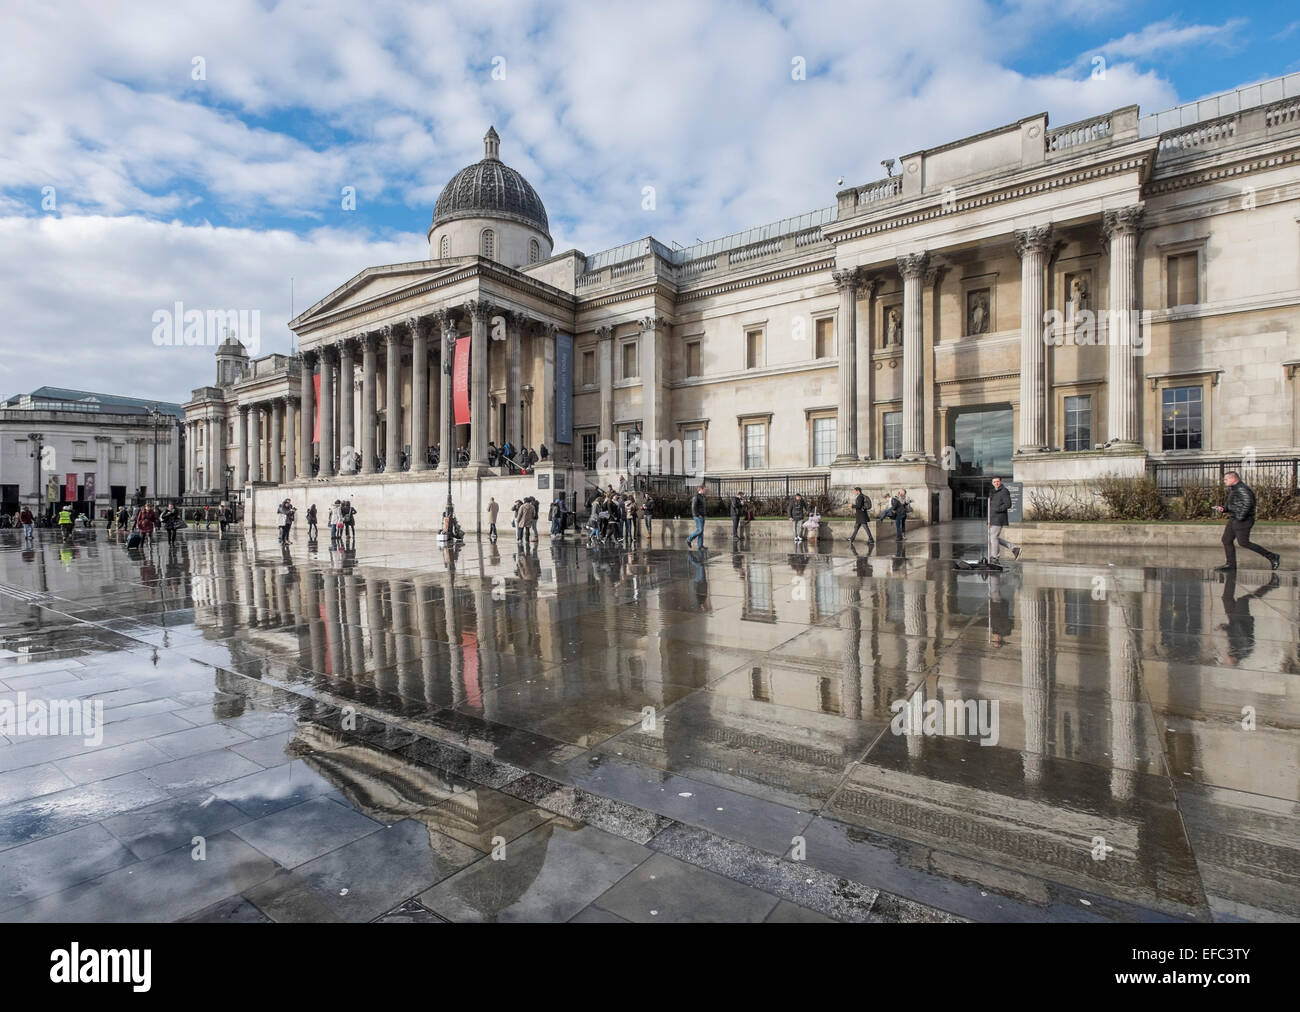 The National Gallery in Trafalgar Square, London, England Stock Photo